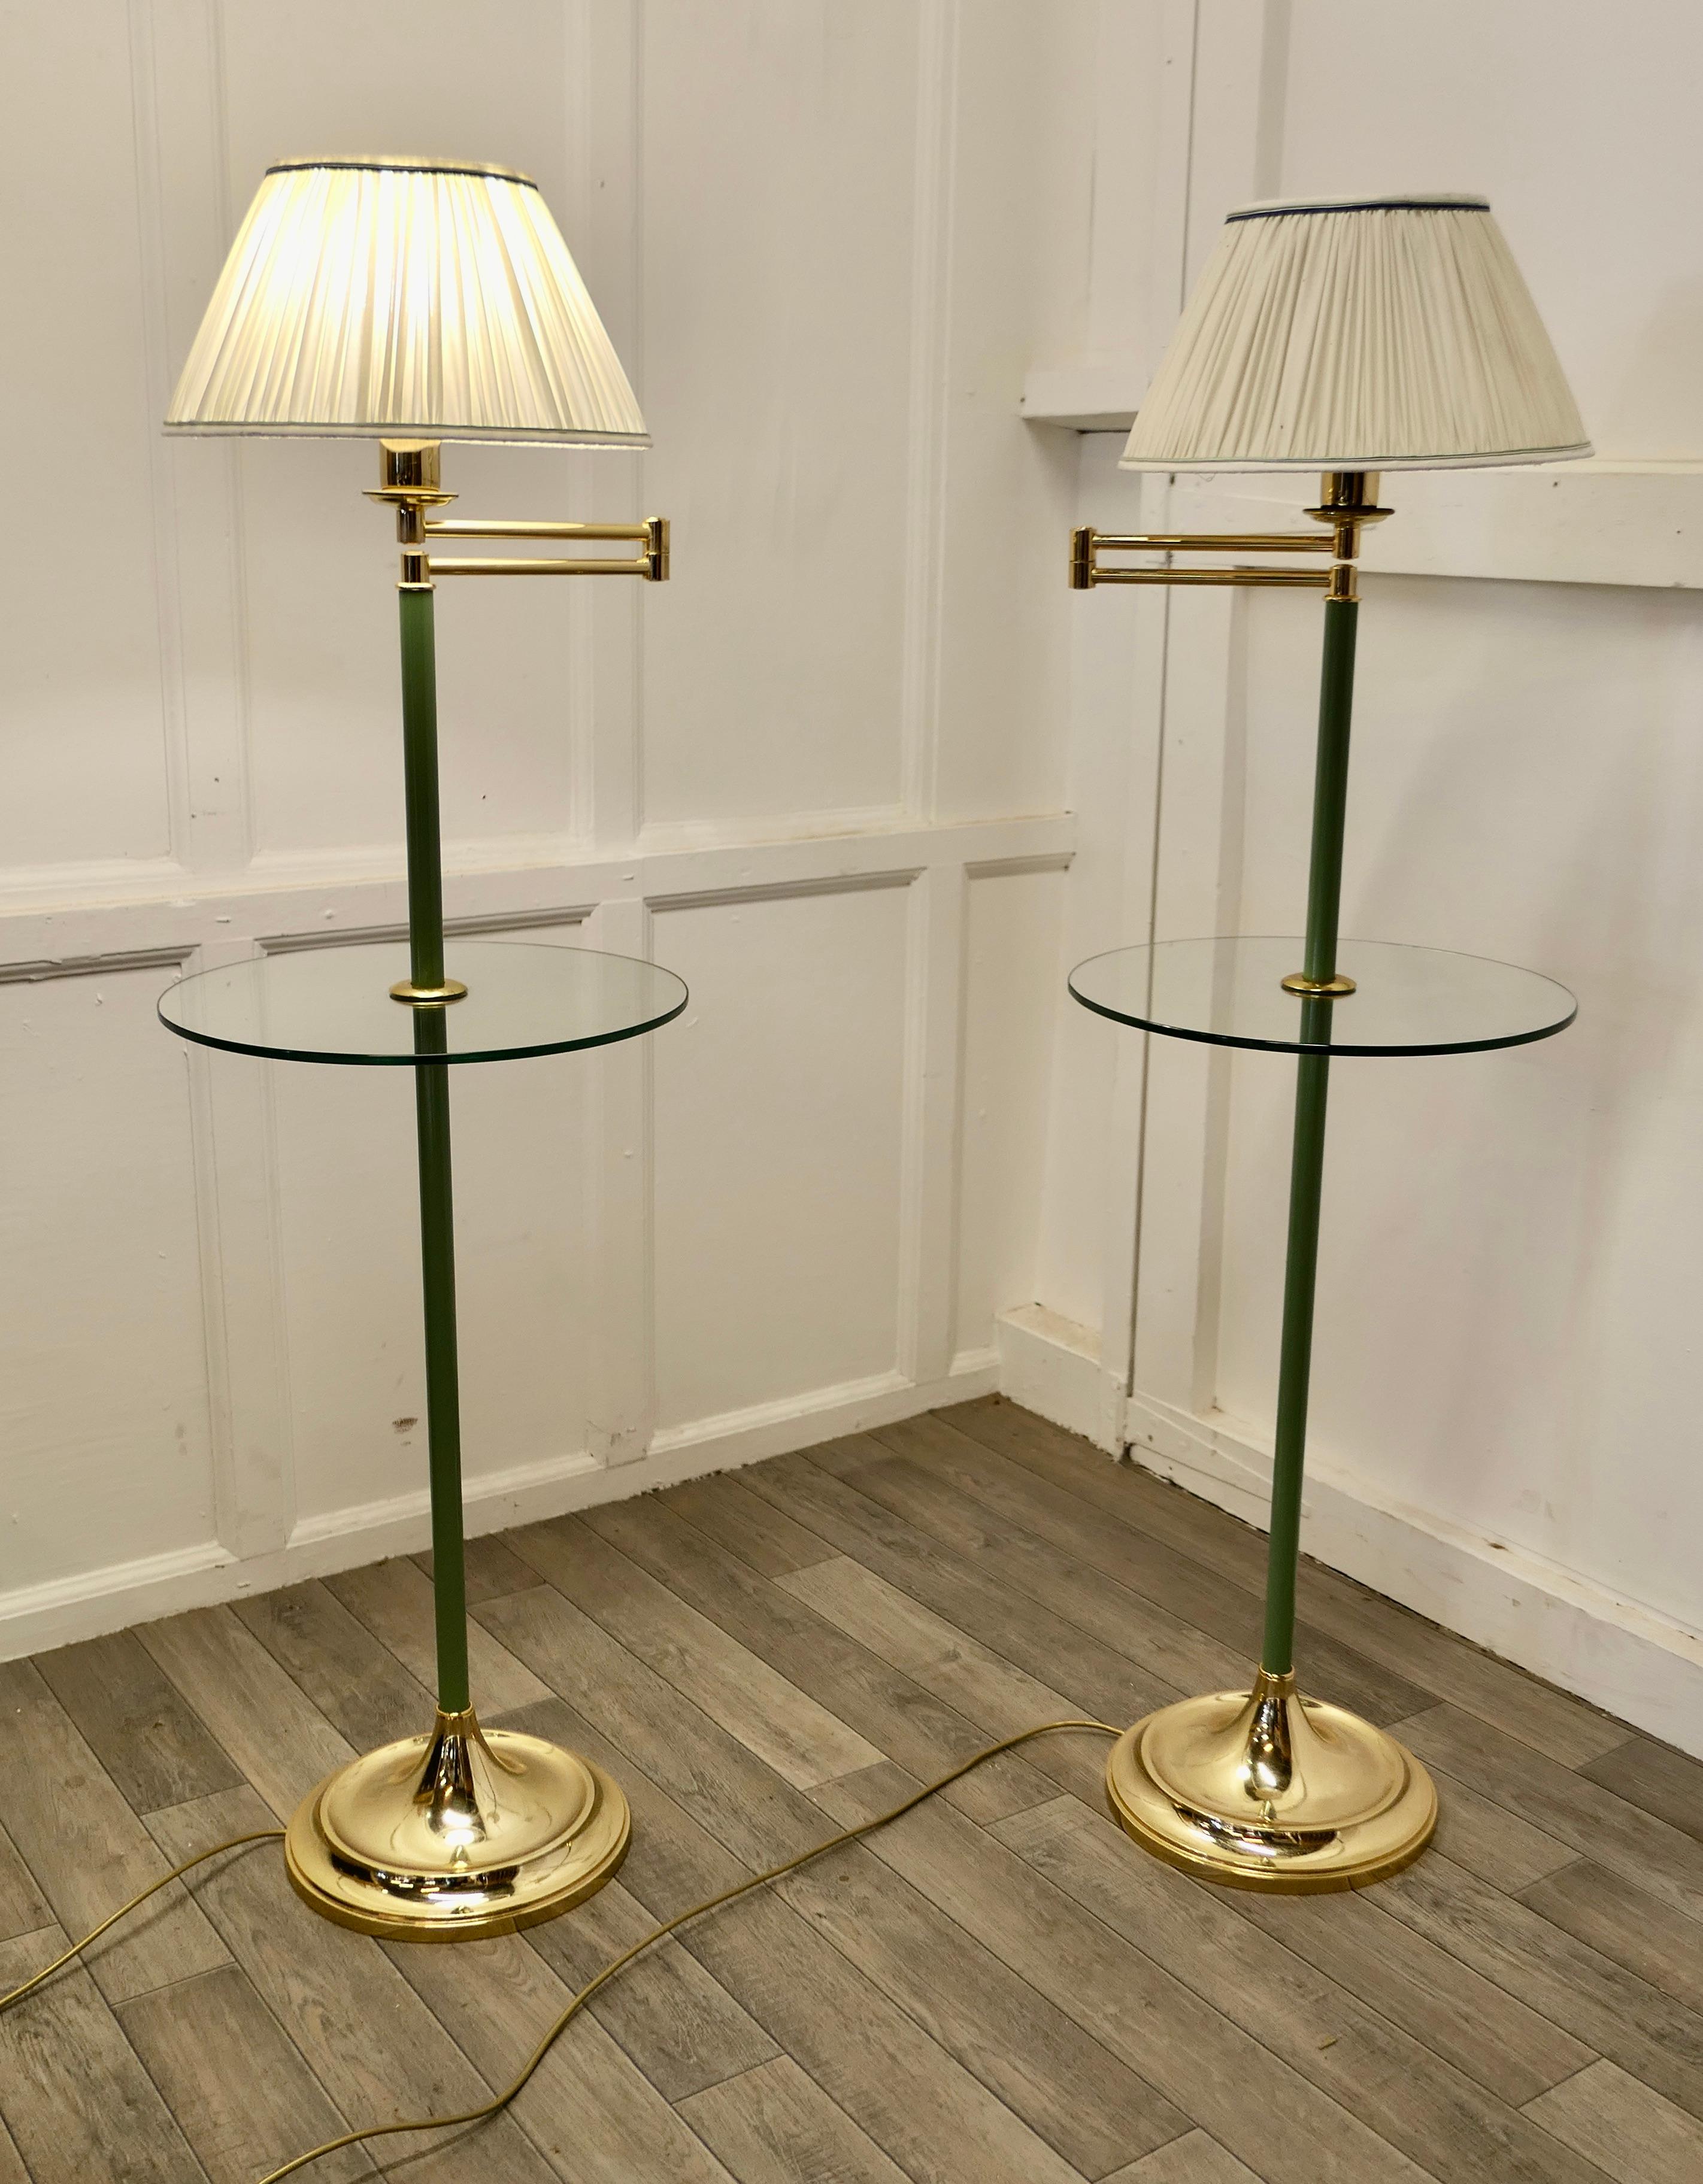 A Pair of French Art Deco adjustable swing arm floor lamps, reading Lamps

These are beautifully designed pieces, the lamps have a heavy brass base which supports a green column with an adjustable Swing Arm on a full height column, this can be